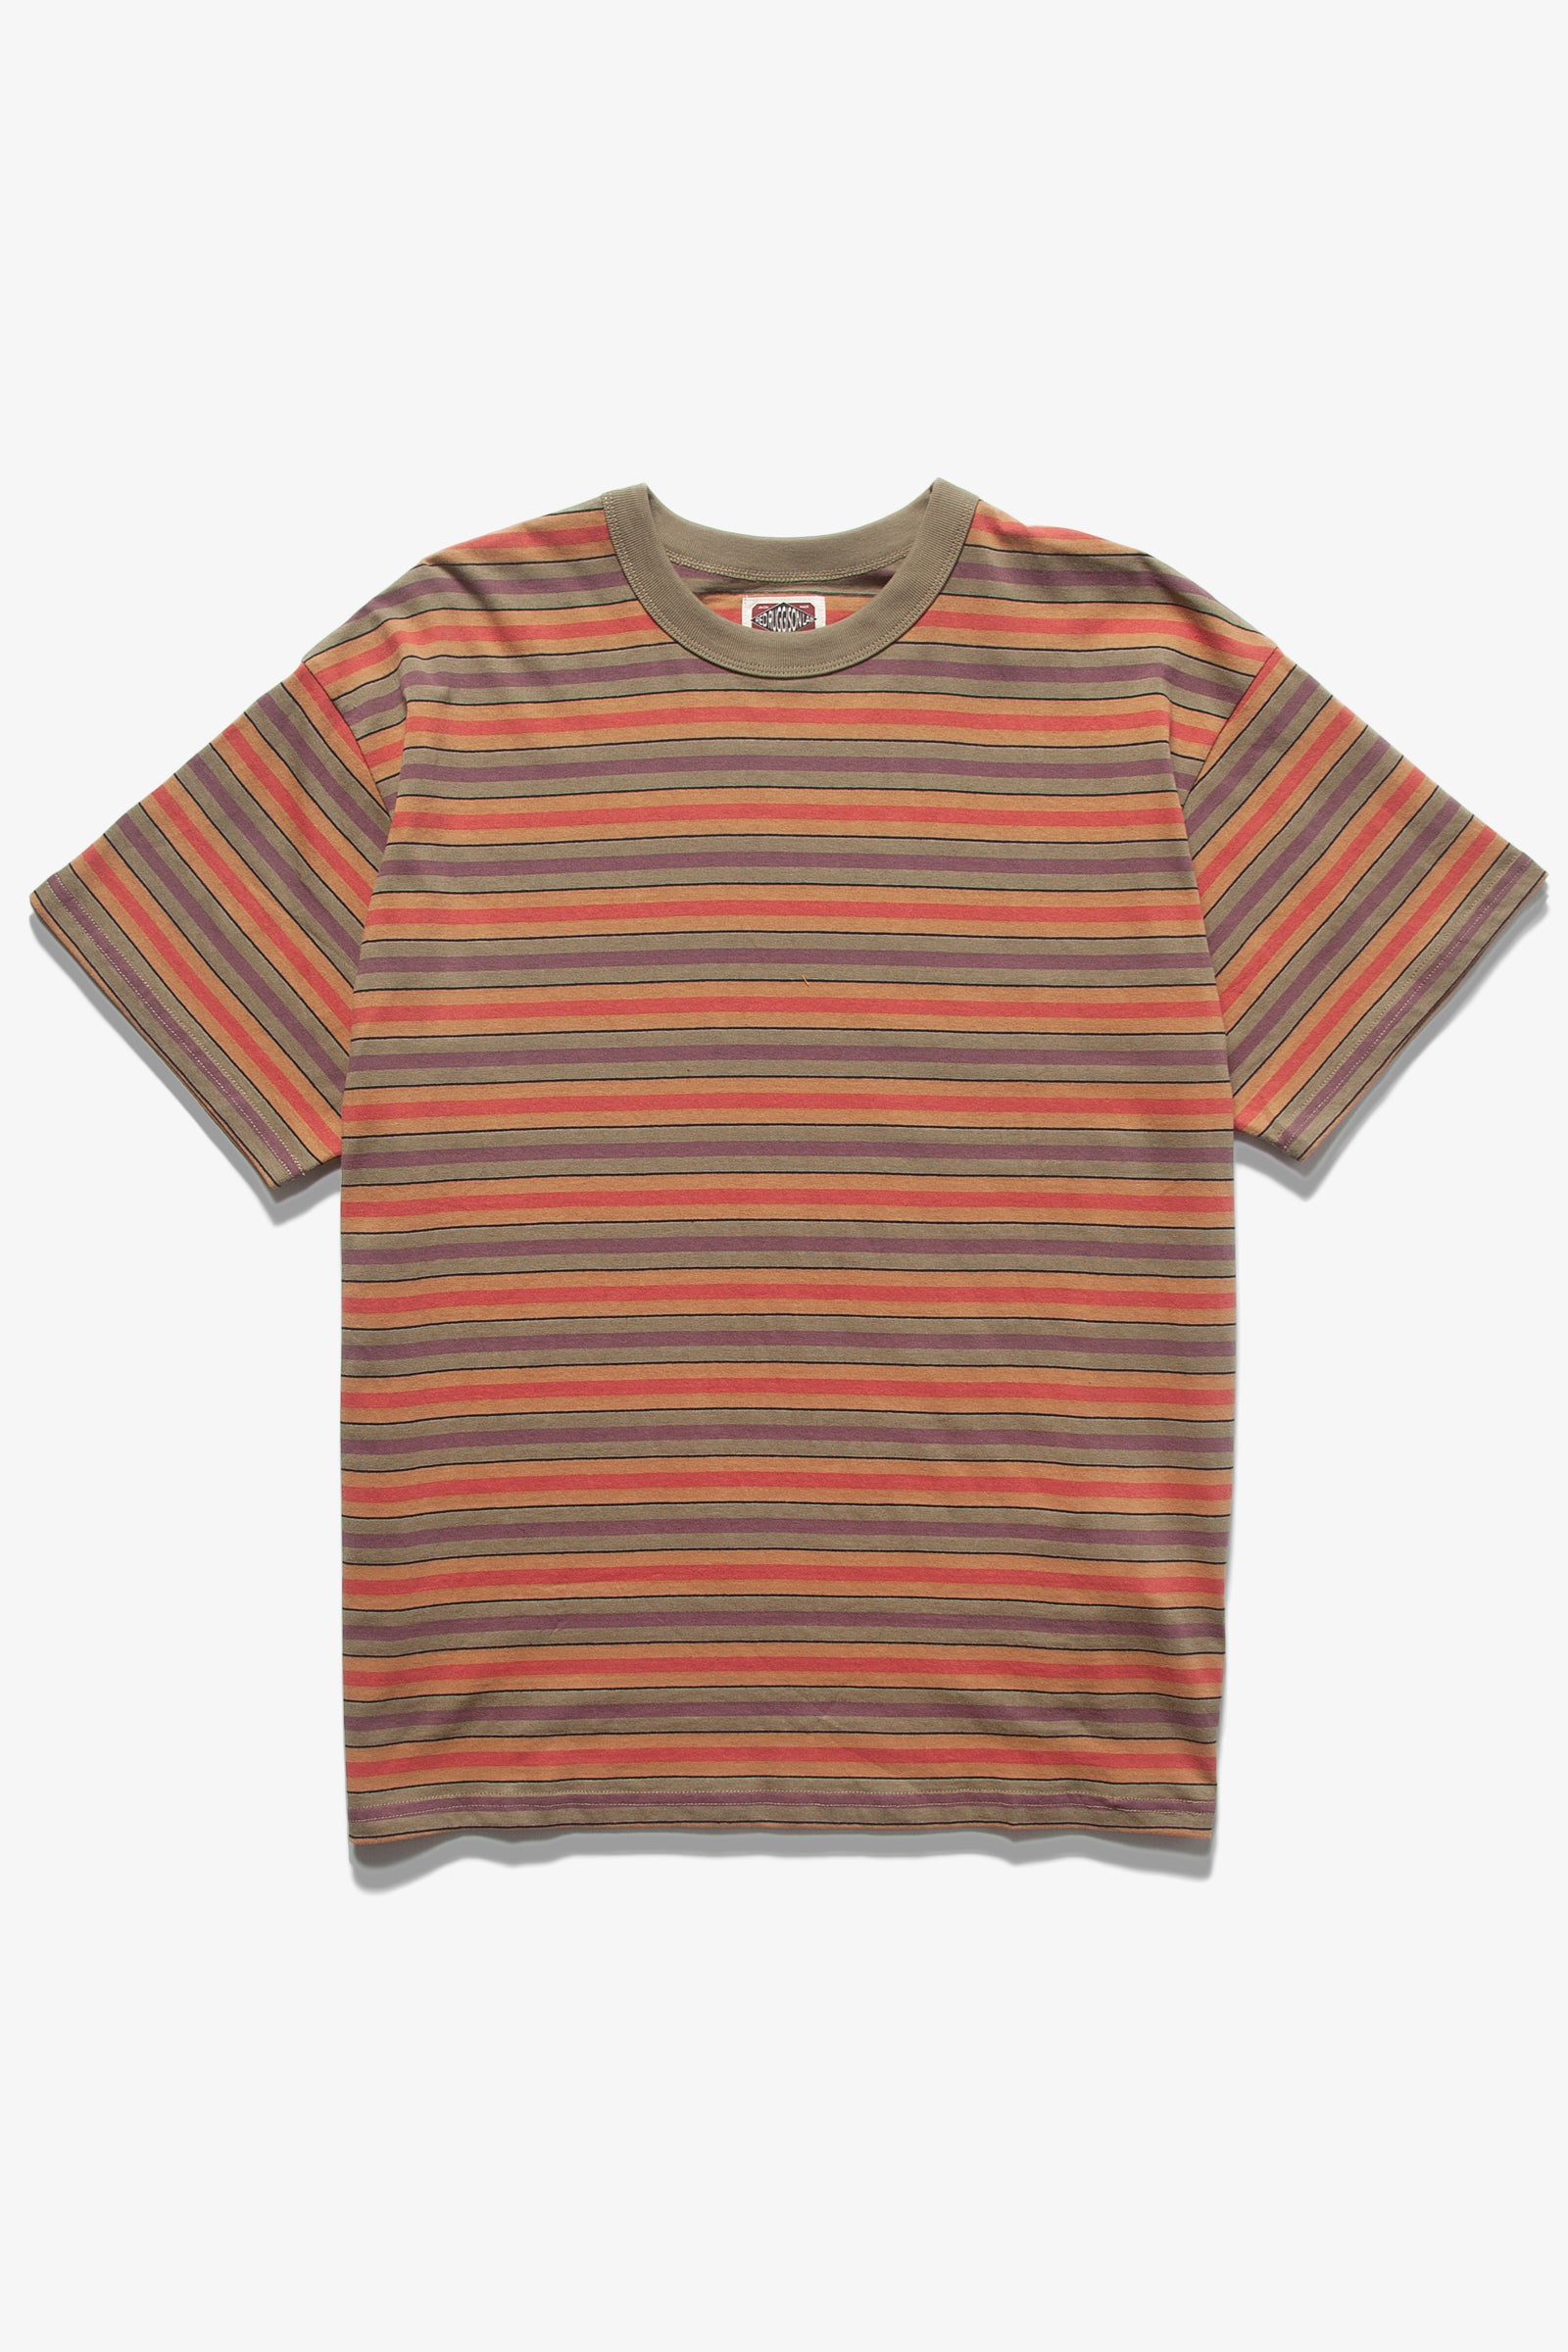 Red Ruggison - 90's Striped T-Shirt - Moss/Yellow